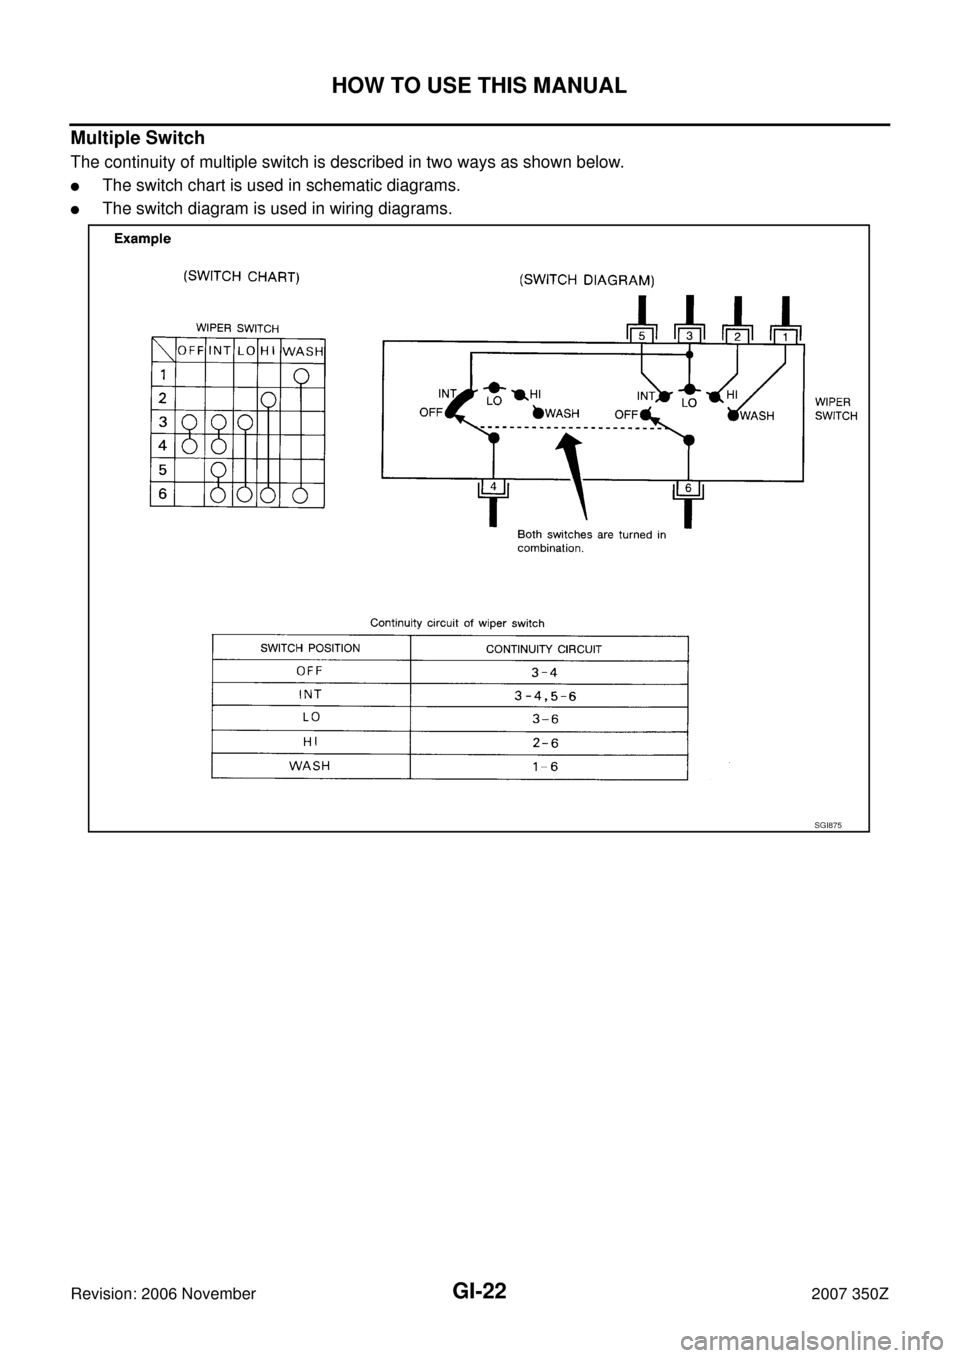 NISSAN 350Z 2007 Z33 General Information Owners Manual GI-22
HOW TO USE THIS MANUAL
Revision: 2006 November2007 350Z
Multiple Switch 
The continuity of multiple switch is described in two ways as shown below.
The switch chart is used in schematic diagram